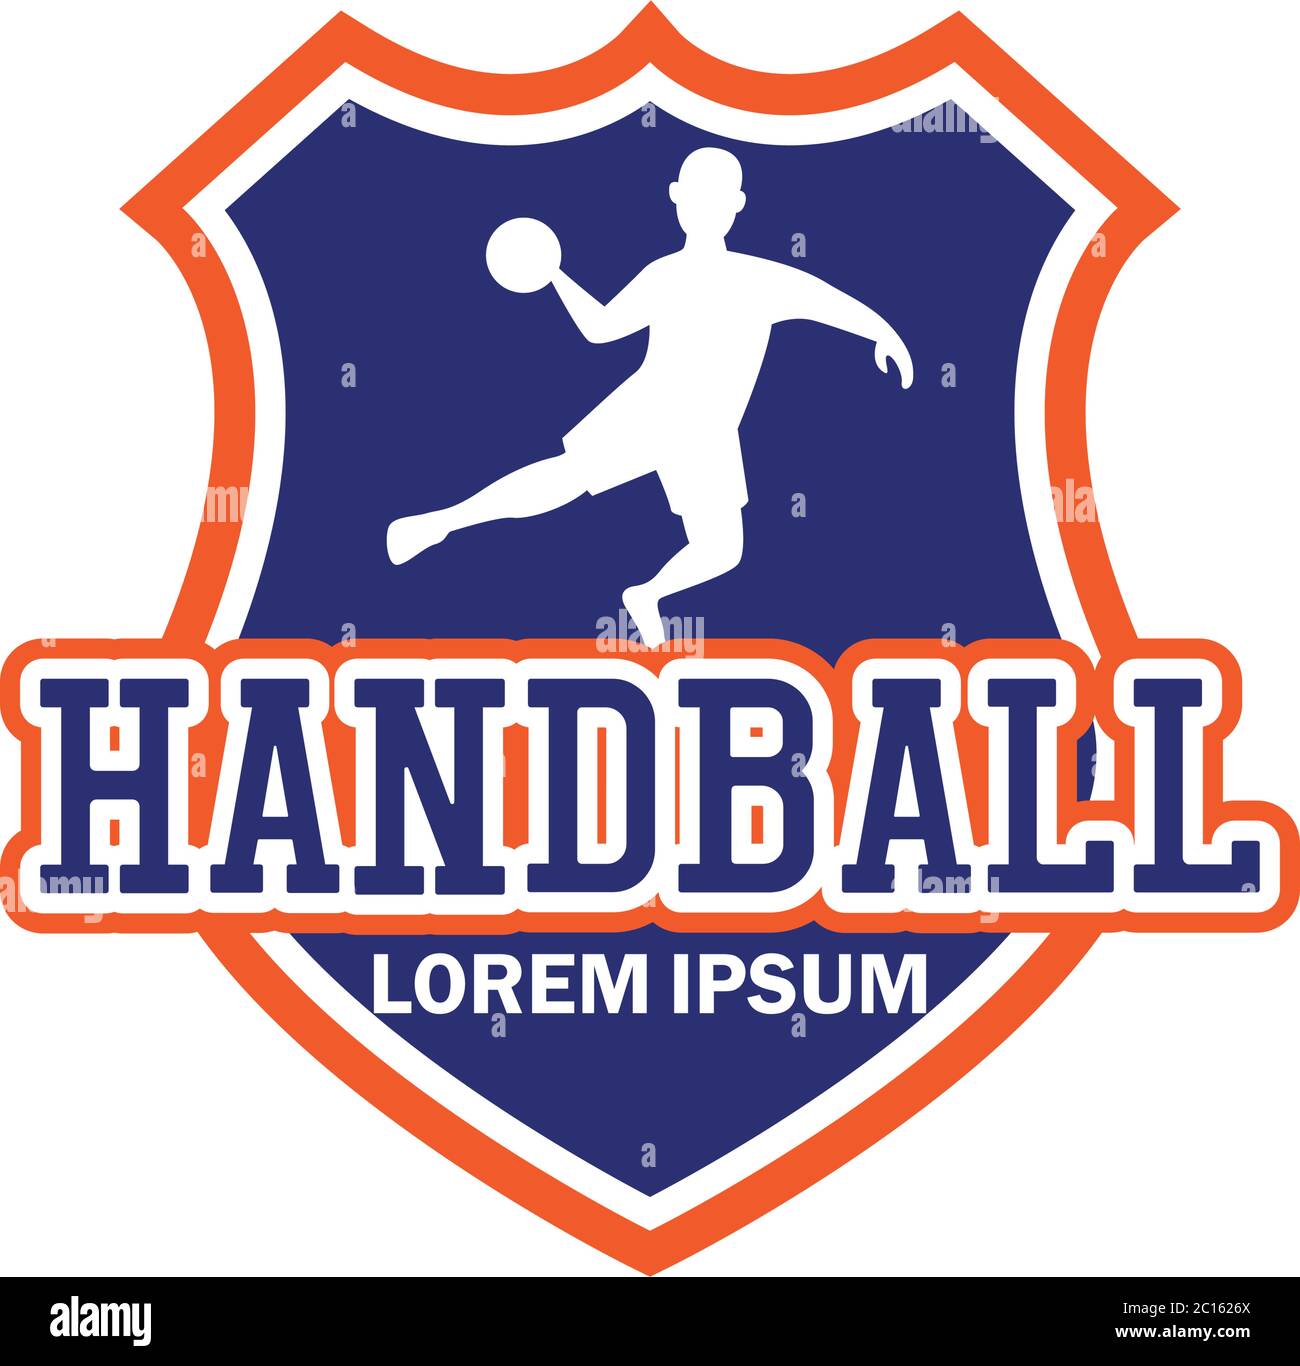 handball logo with text space for your slogan / tag line, vector illustration Stock Vector